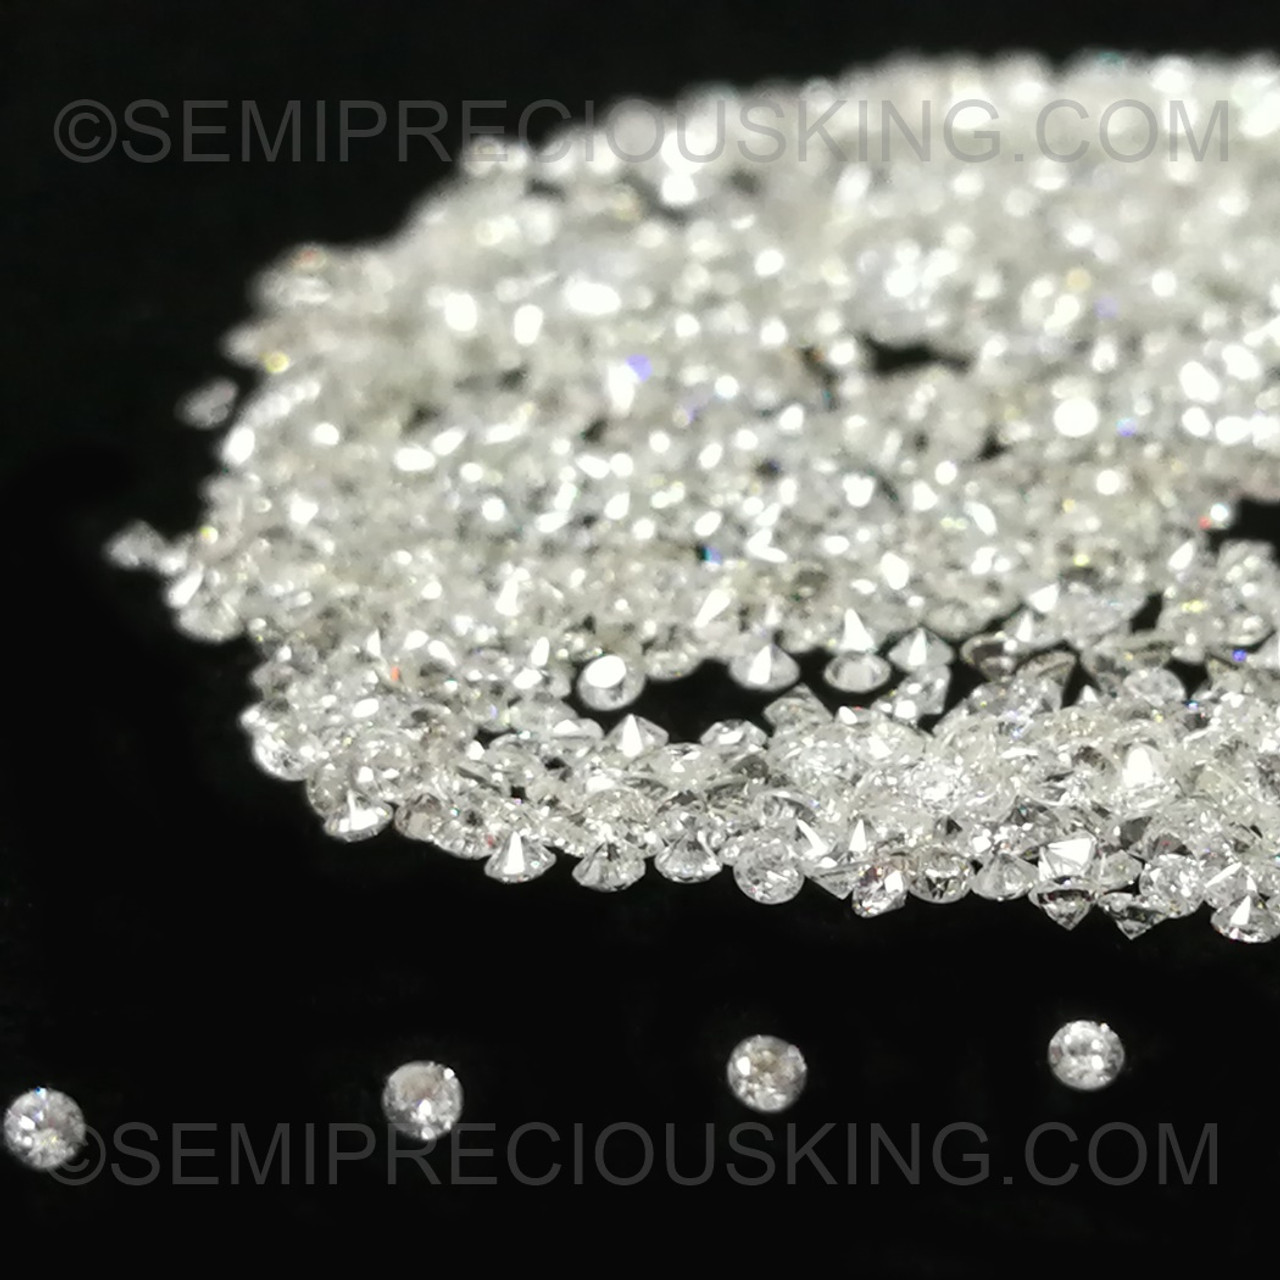 Details about   NATURAL PAIR PIECE'S 0.06 CT LOOSE DIAMOND 0.12 TCW G-H COLOR VS CLARITY N05DJ45 